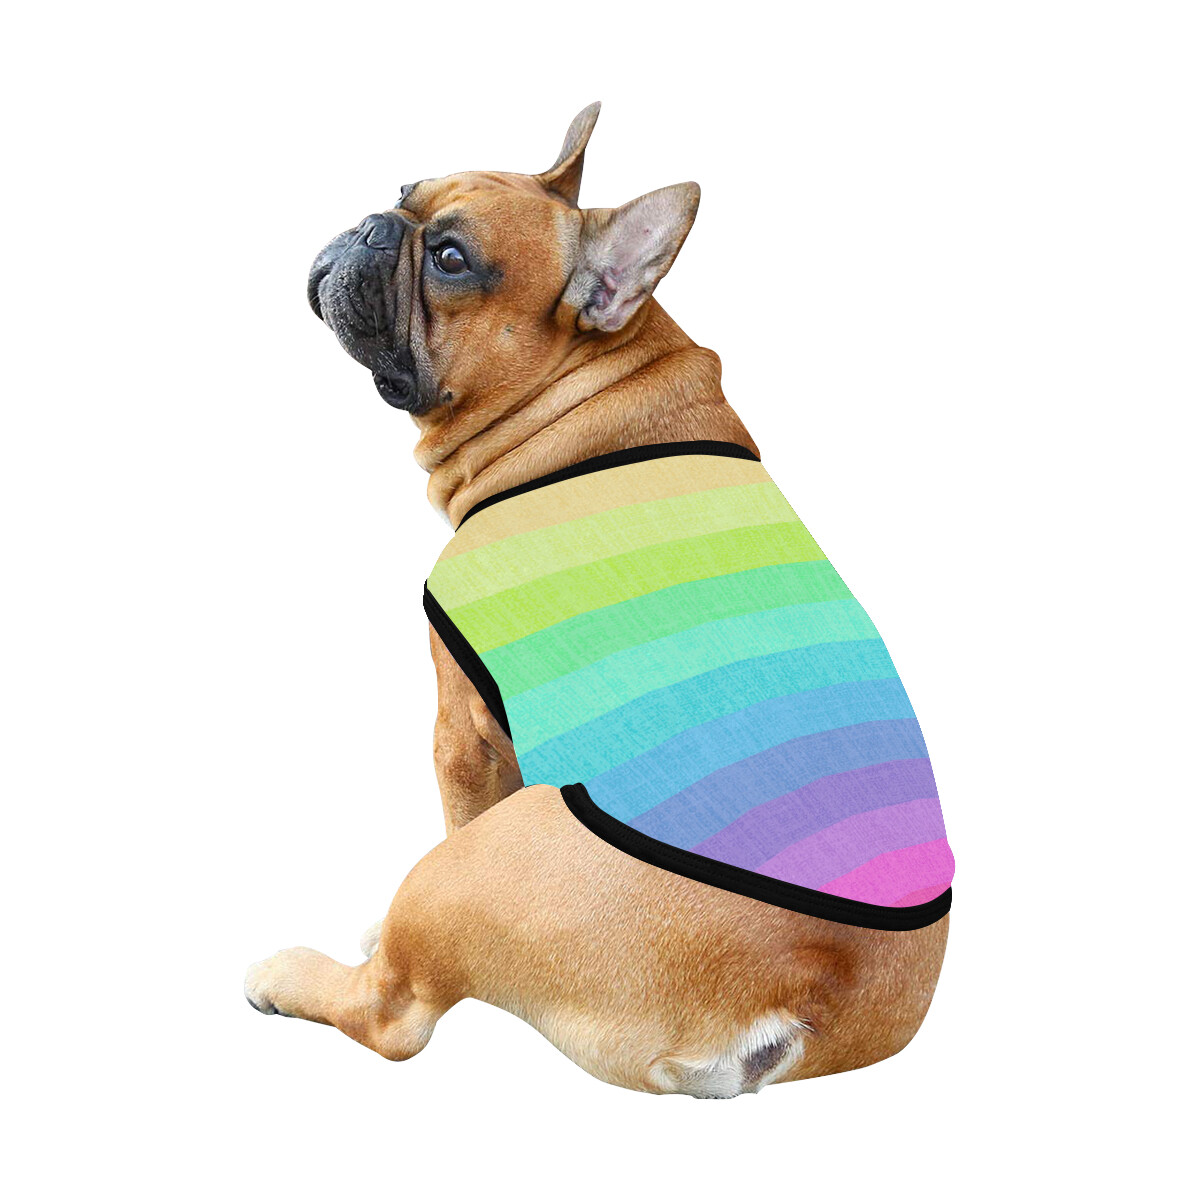 🐕 Rainbow Dog shirt Dog Tank Top, Dog t-shirt, Dog clothes, Gifts, front back print, 7 sizes XS to 3XL, dog gifts, pastel colors